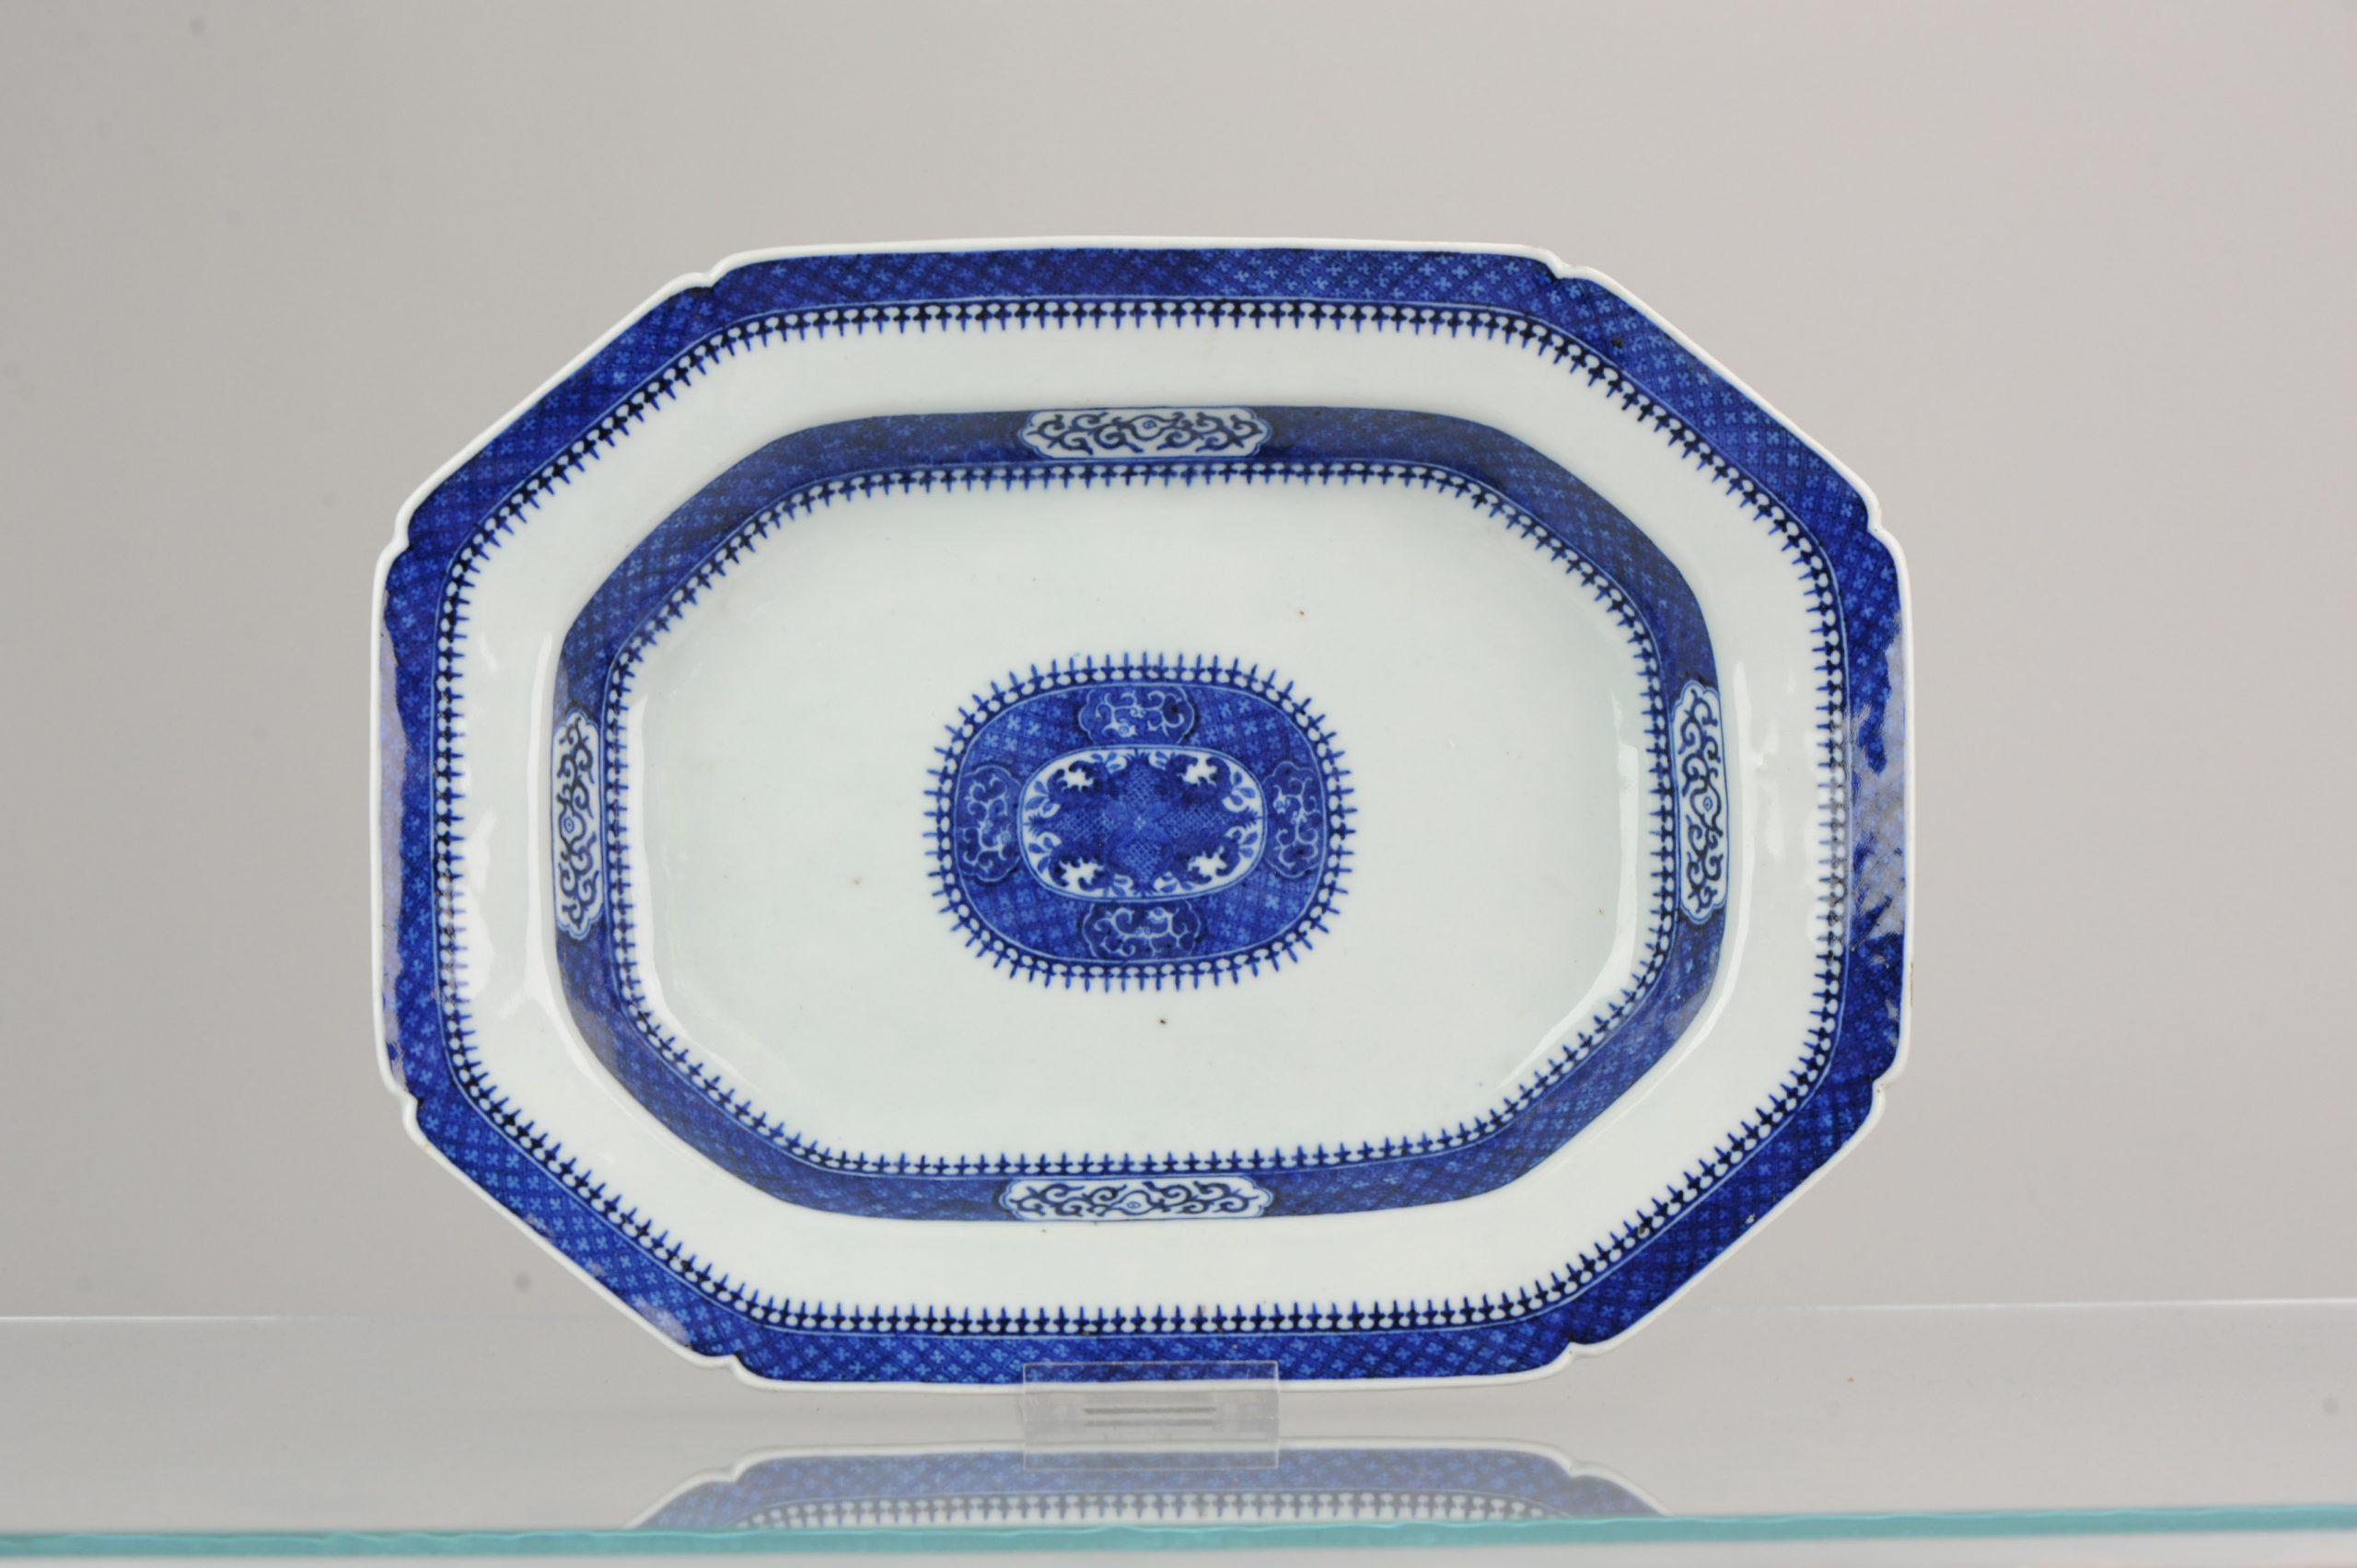 An excellent, deep and large octagonal serving dish, exceptionally finely painted in underglaze blue with central reserve containing four pineapples and foliage, surrounded by a wide diaper border and cartouches containing stylized chilins. Further